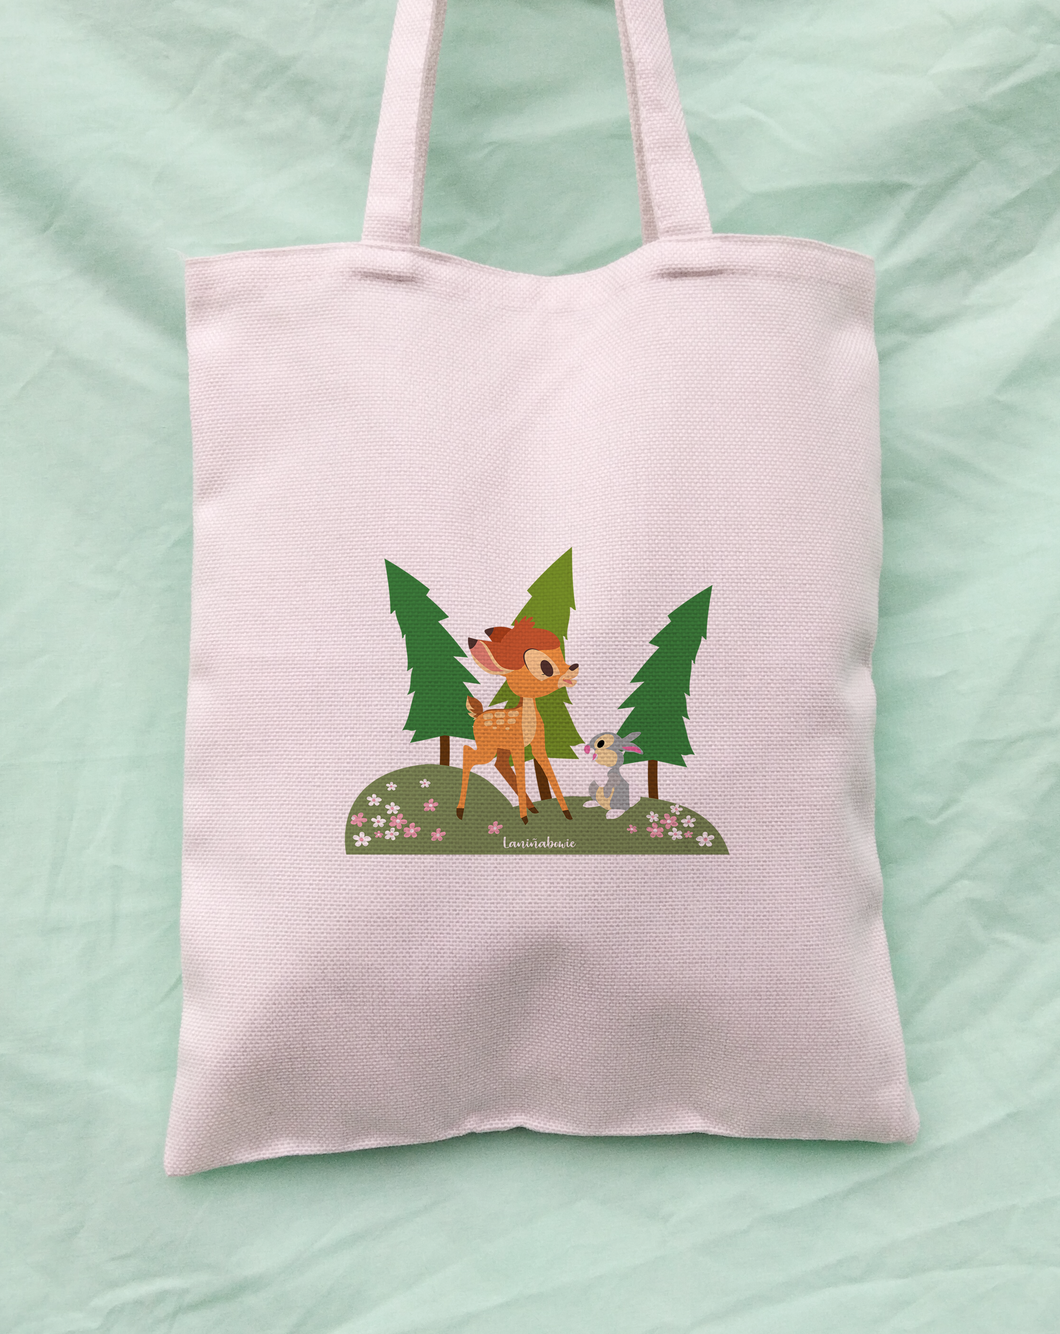 tote bag bambie laniñabowie